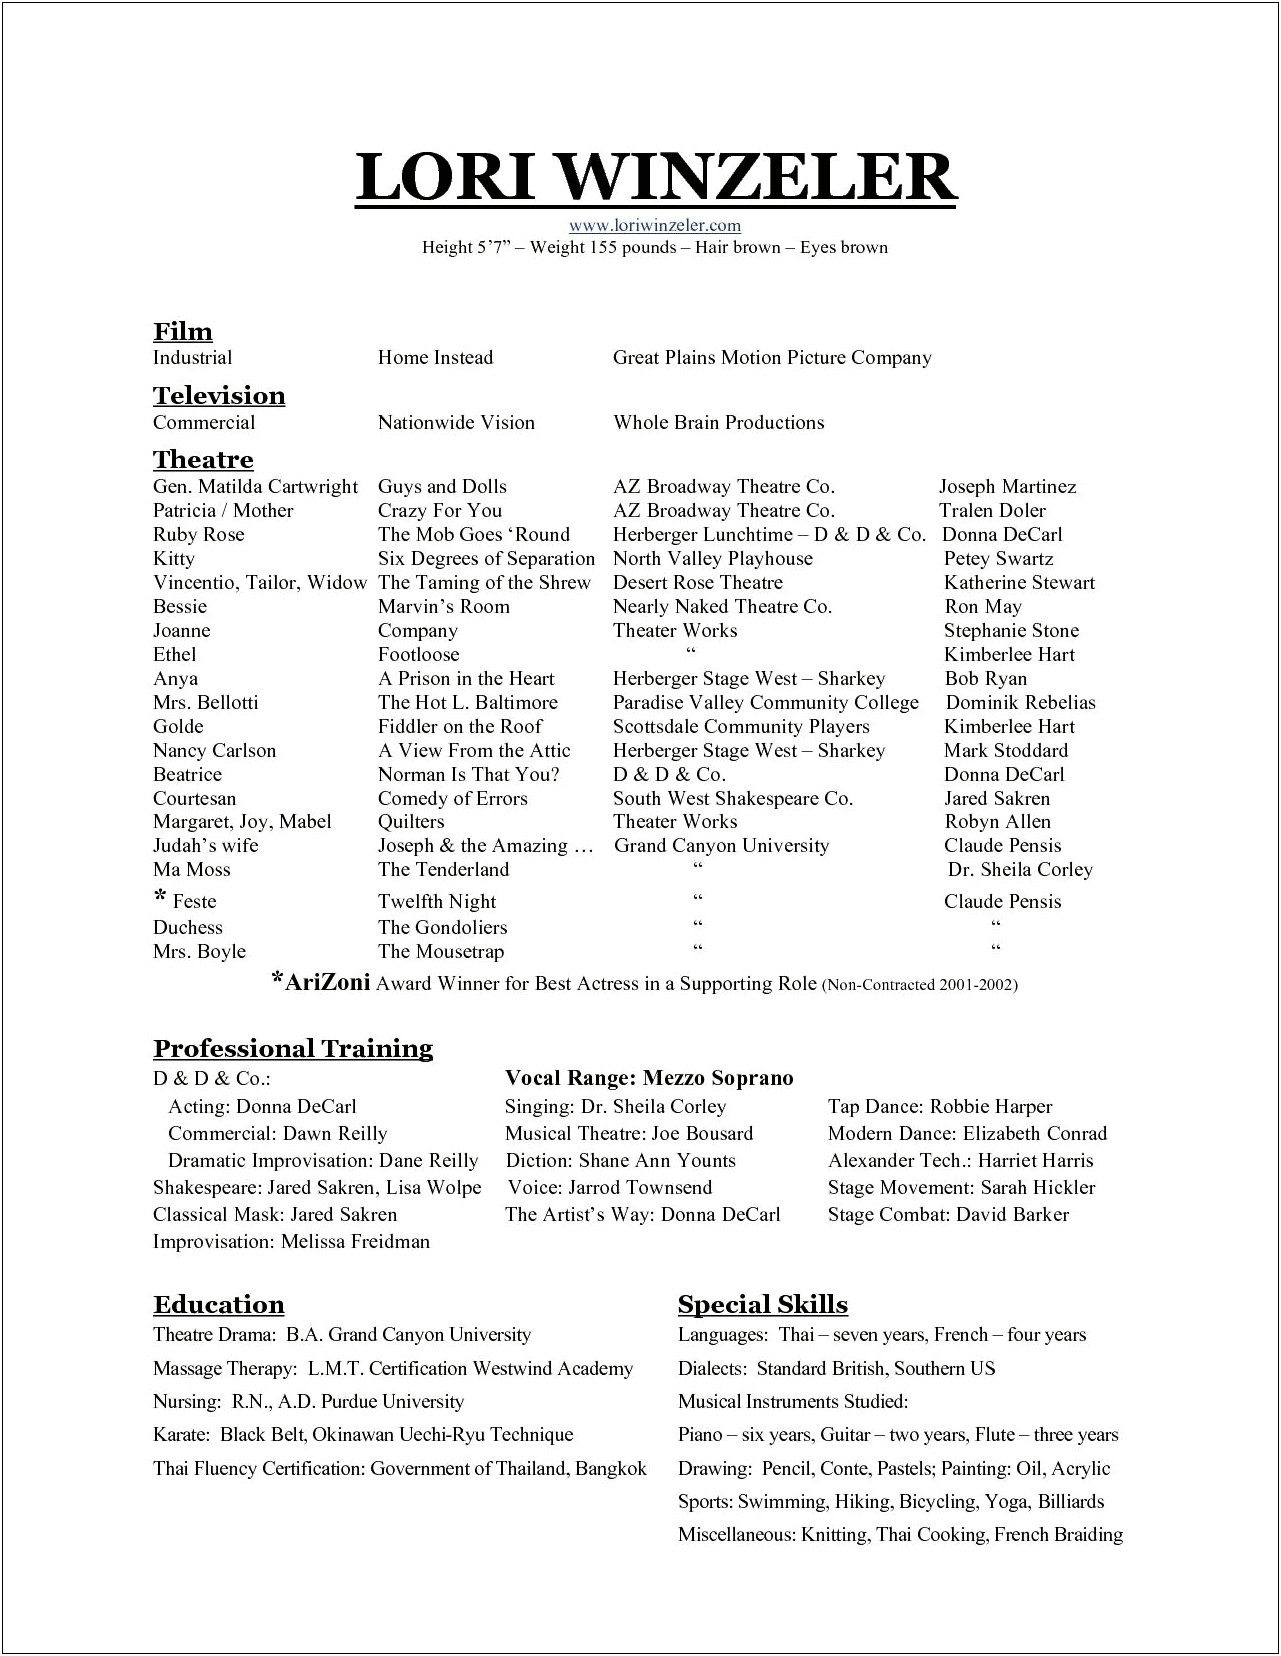 Special Skills On Actor Resume